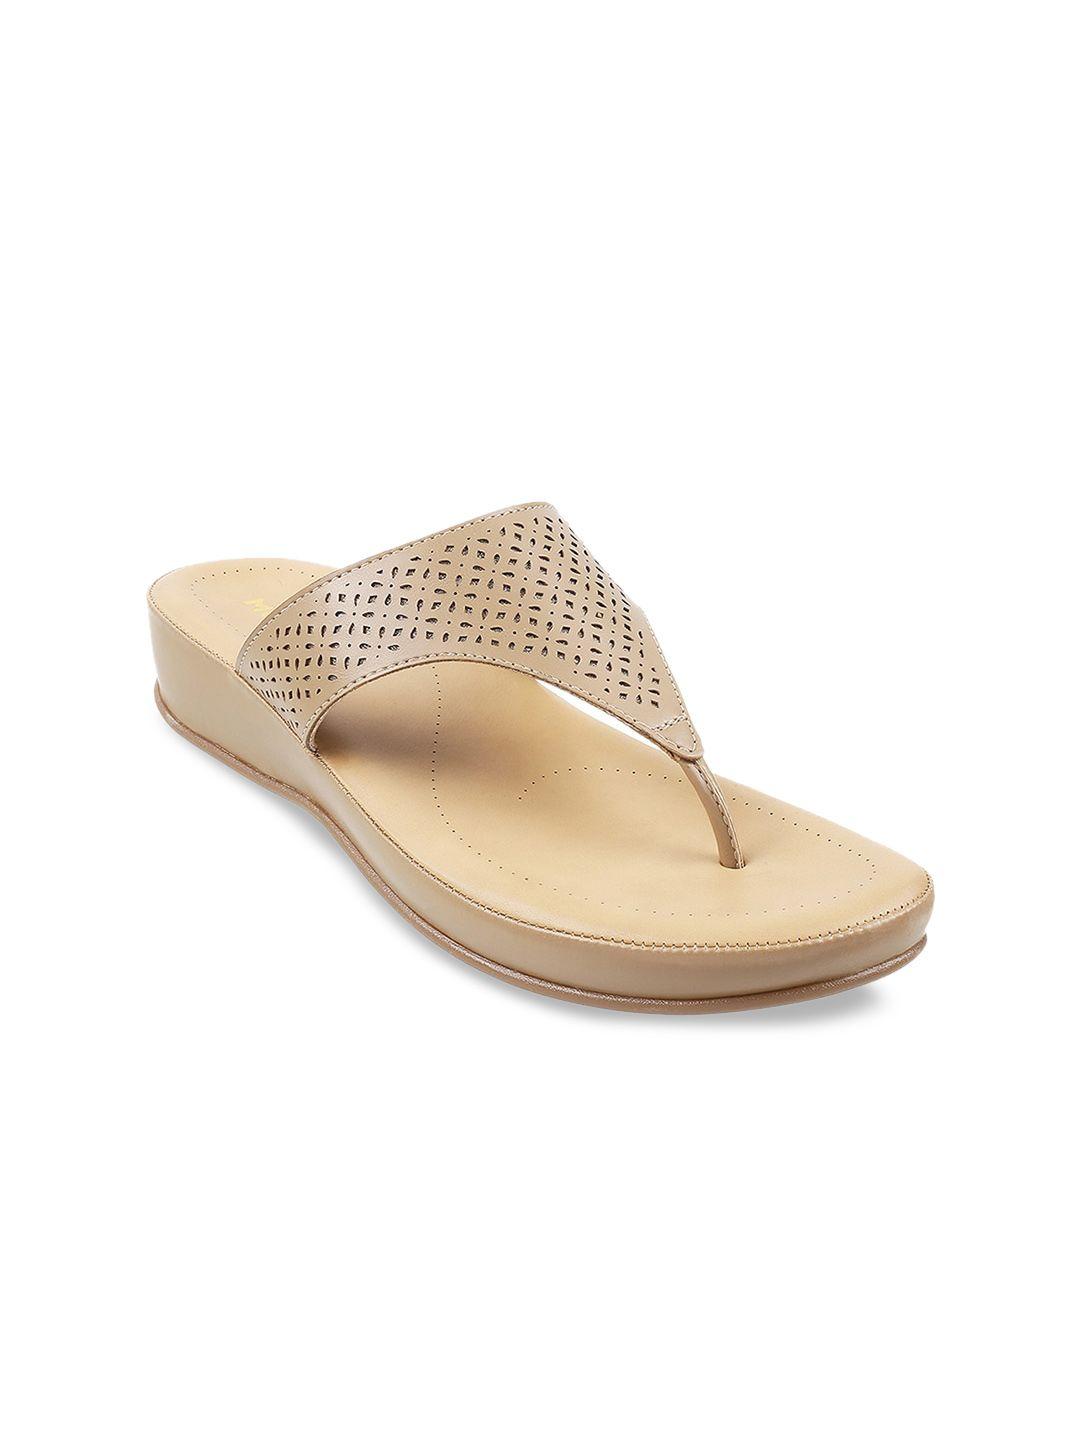 mochi-women-textured-t-strap-flats-with-laser-cuts